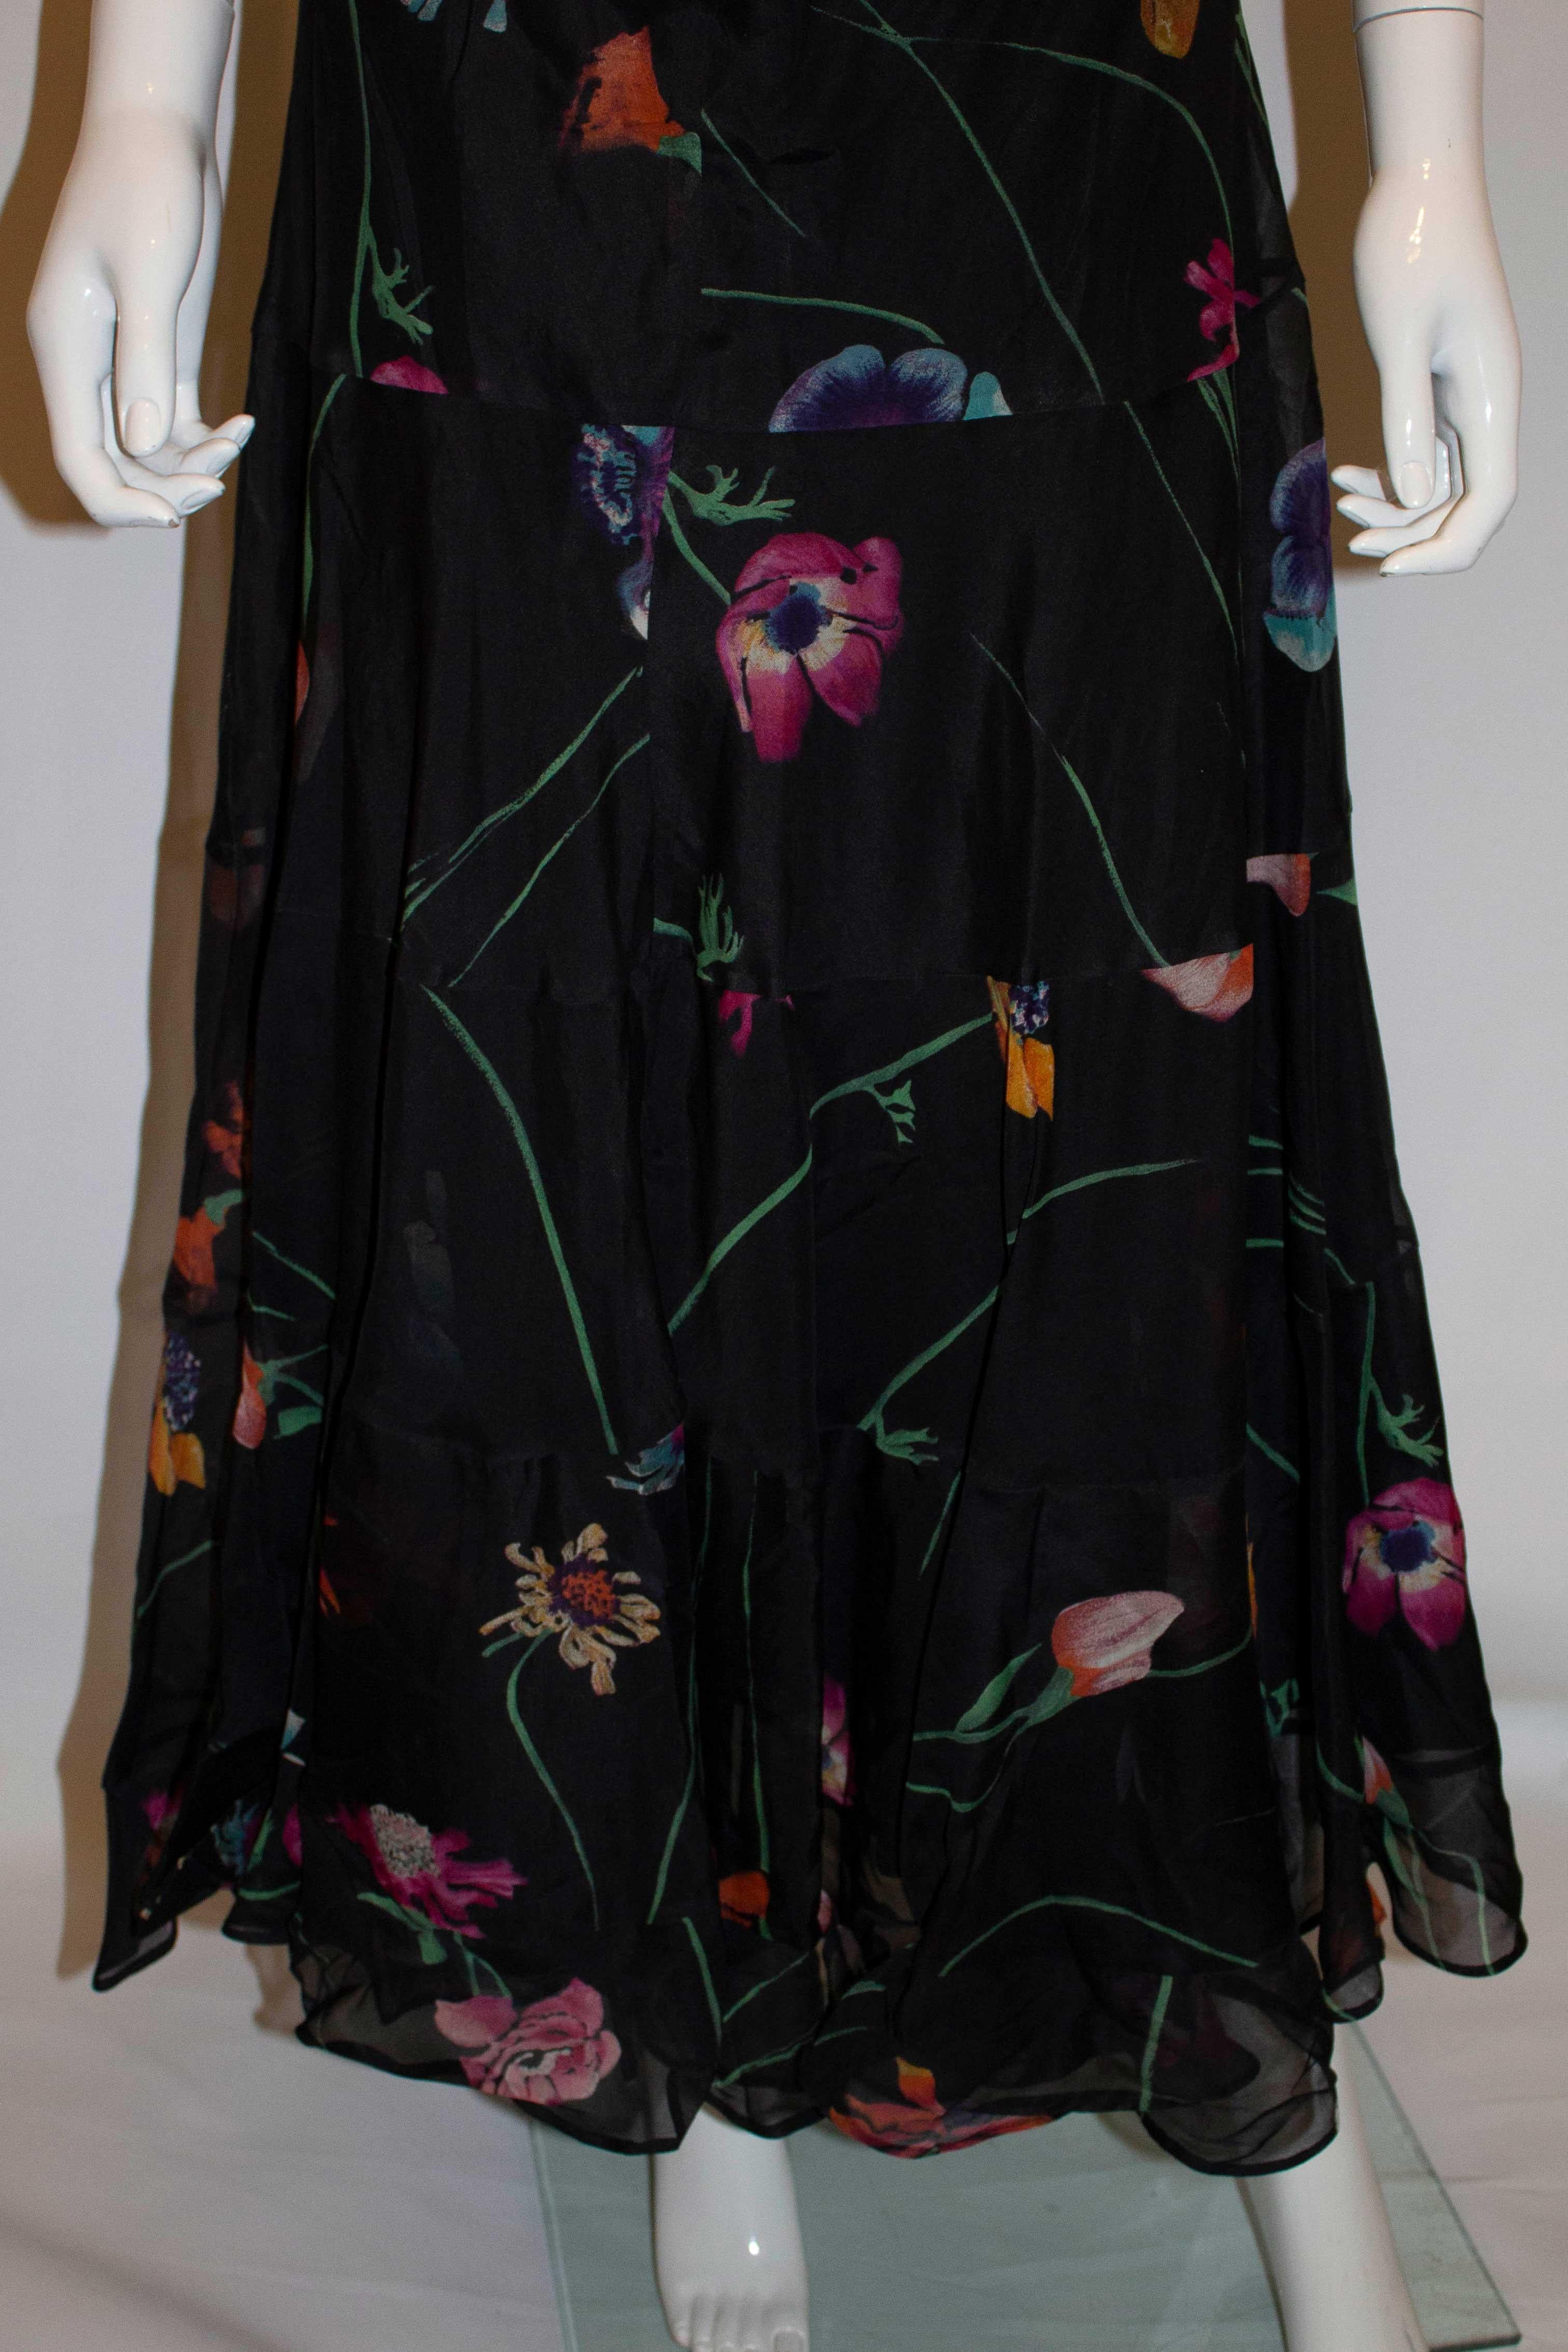 Kenzo Paris Silk Floral Skirt In Good Condition For Sale In London, GB